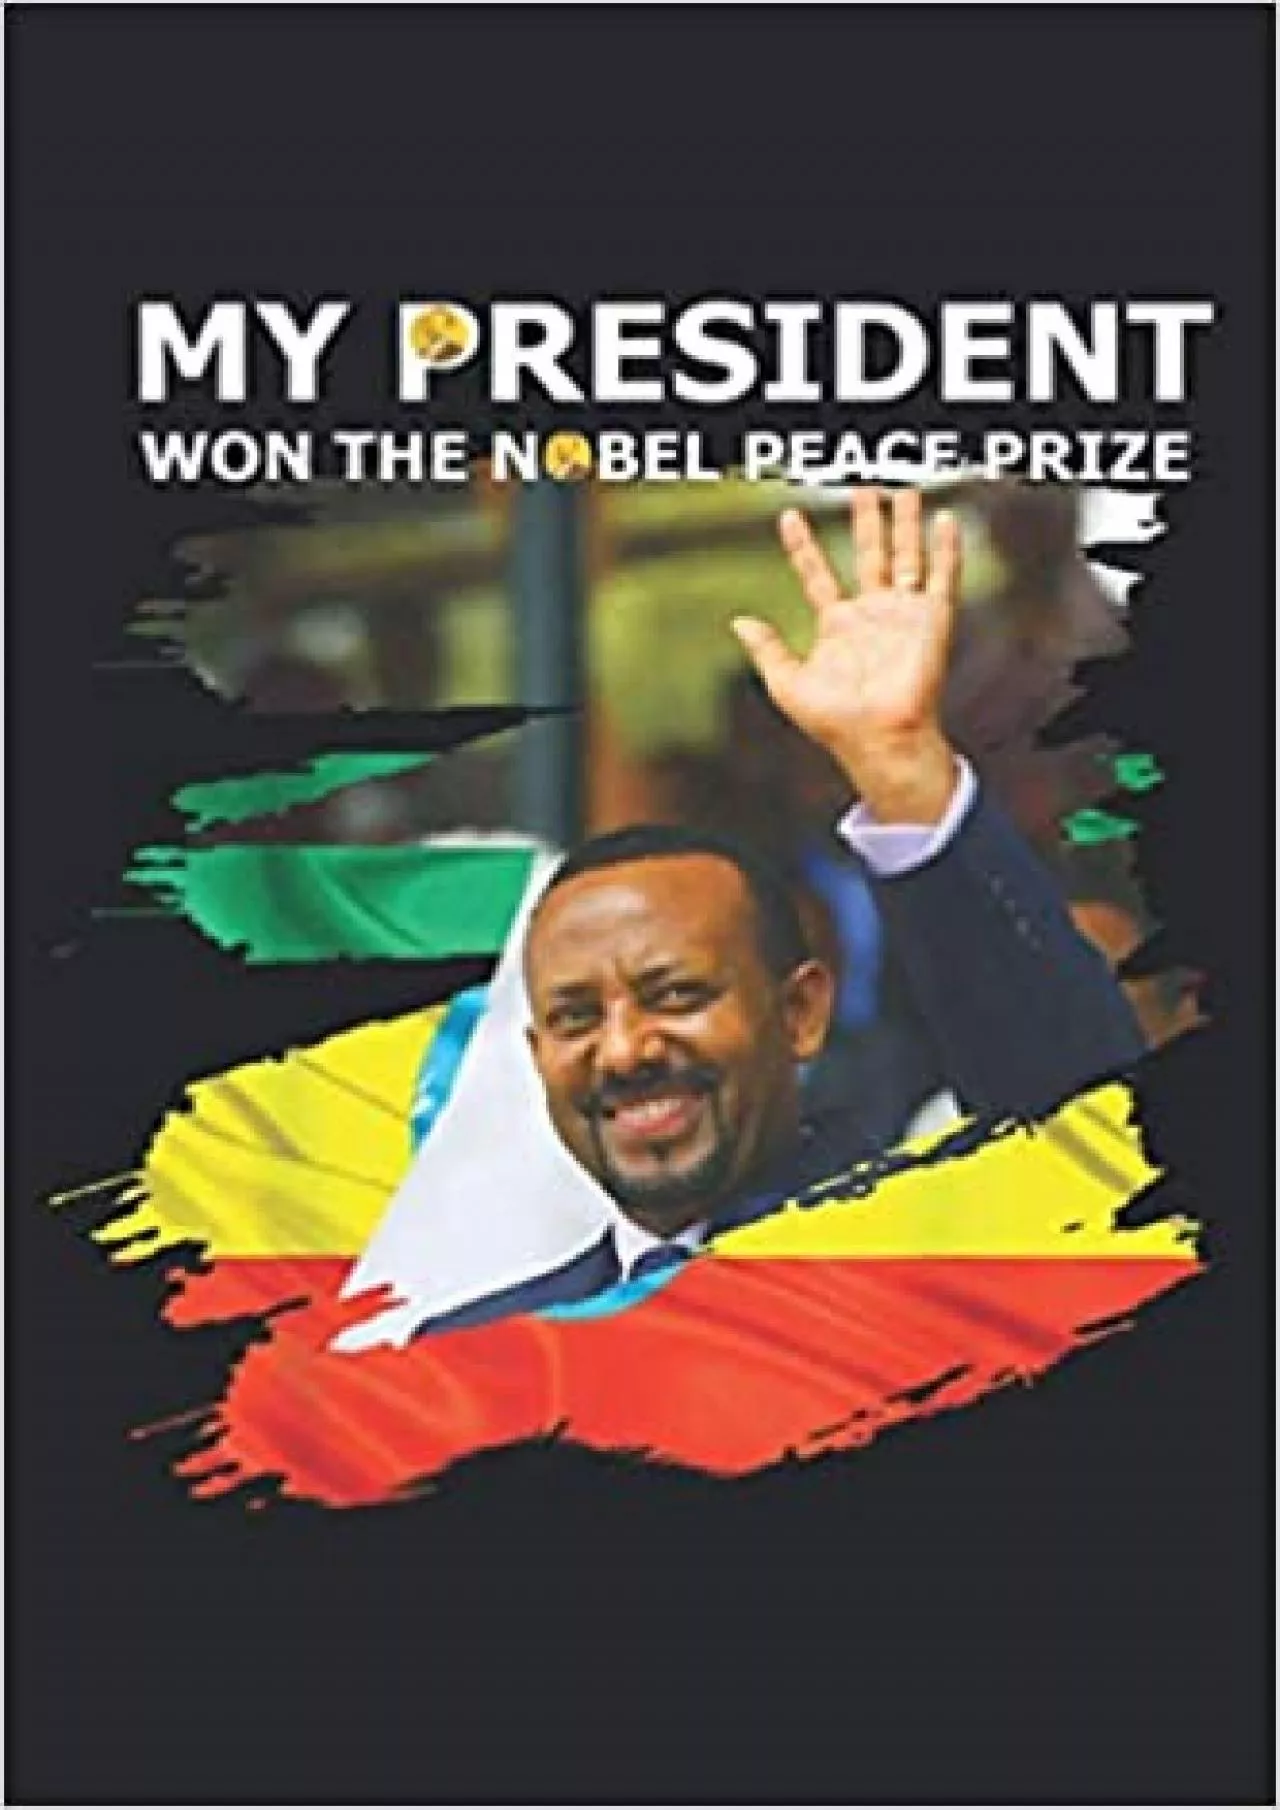 Dr Abiy Ahmed Ethiopian Pm Prize Winner Of Peace: Daily planner notebook A5 size (6 x